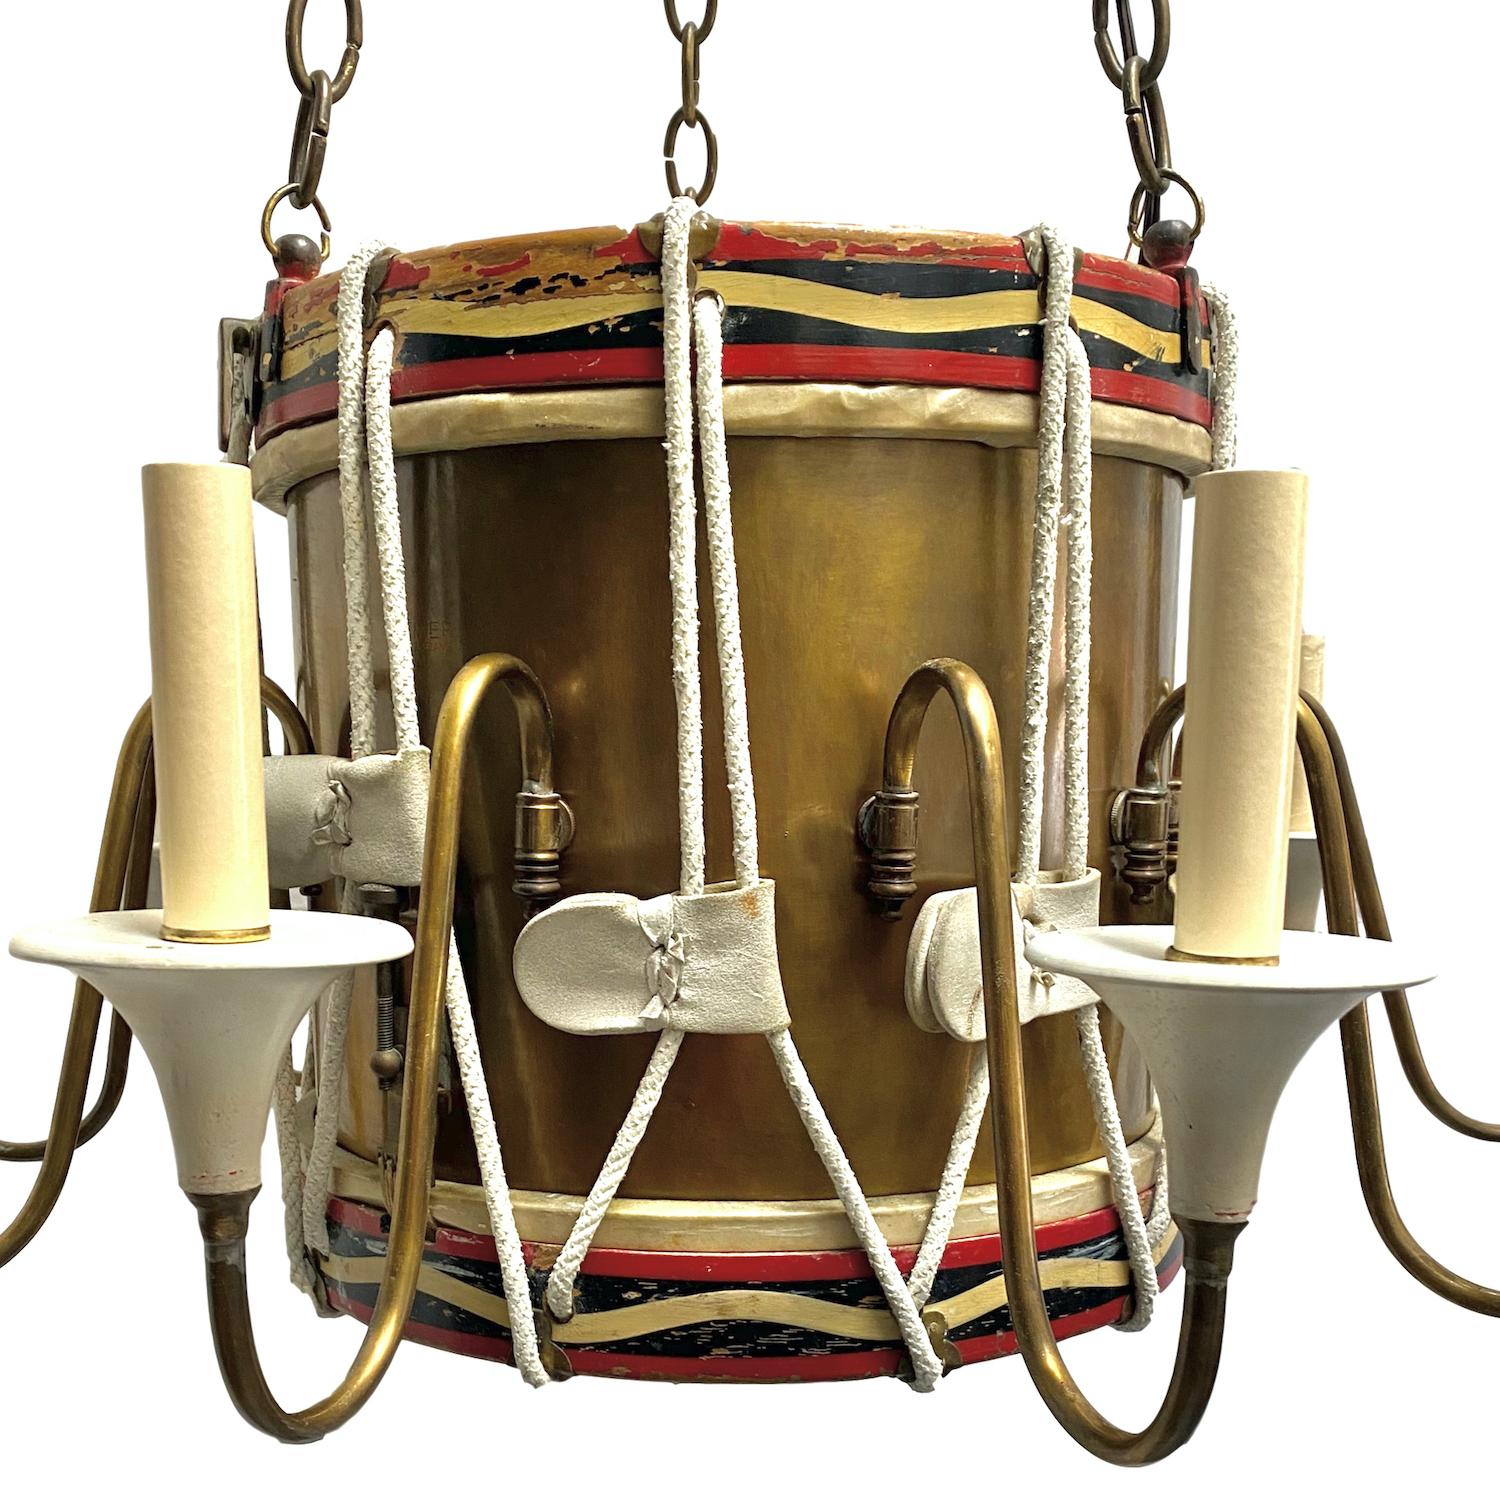 A circa 1940s English 10-arm brass and wood drum chandelier with original painted finish and patina.

Measurements:
Current drop (adjustable) 42